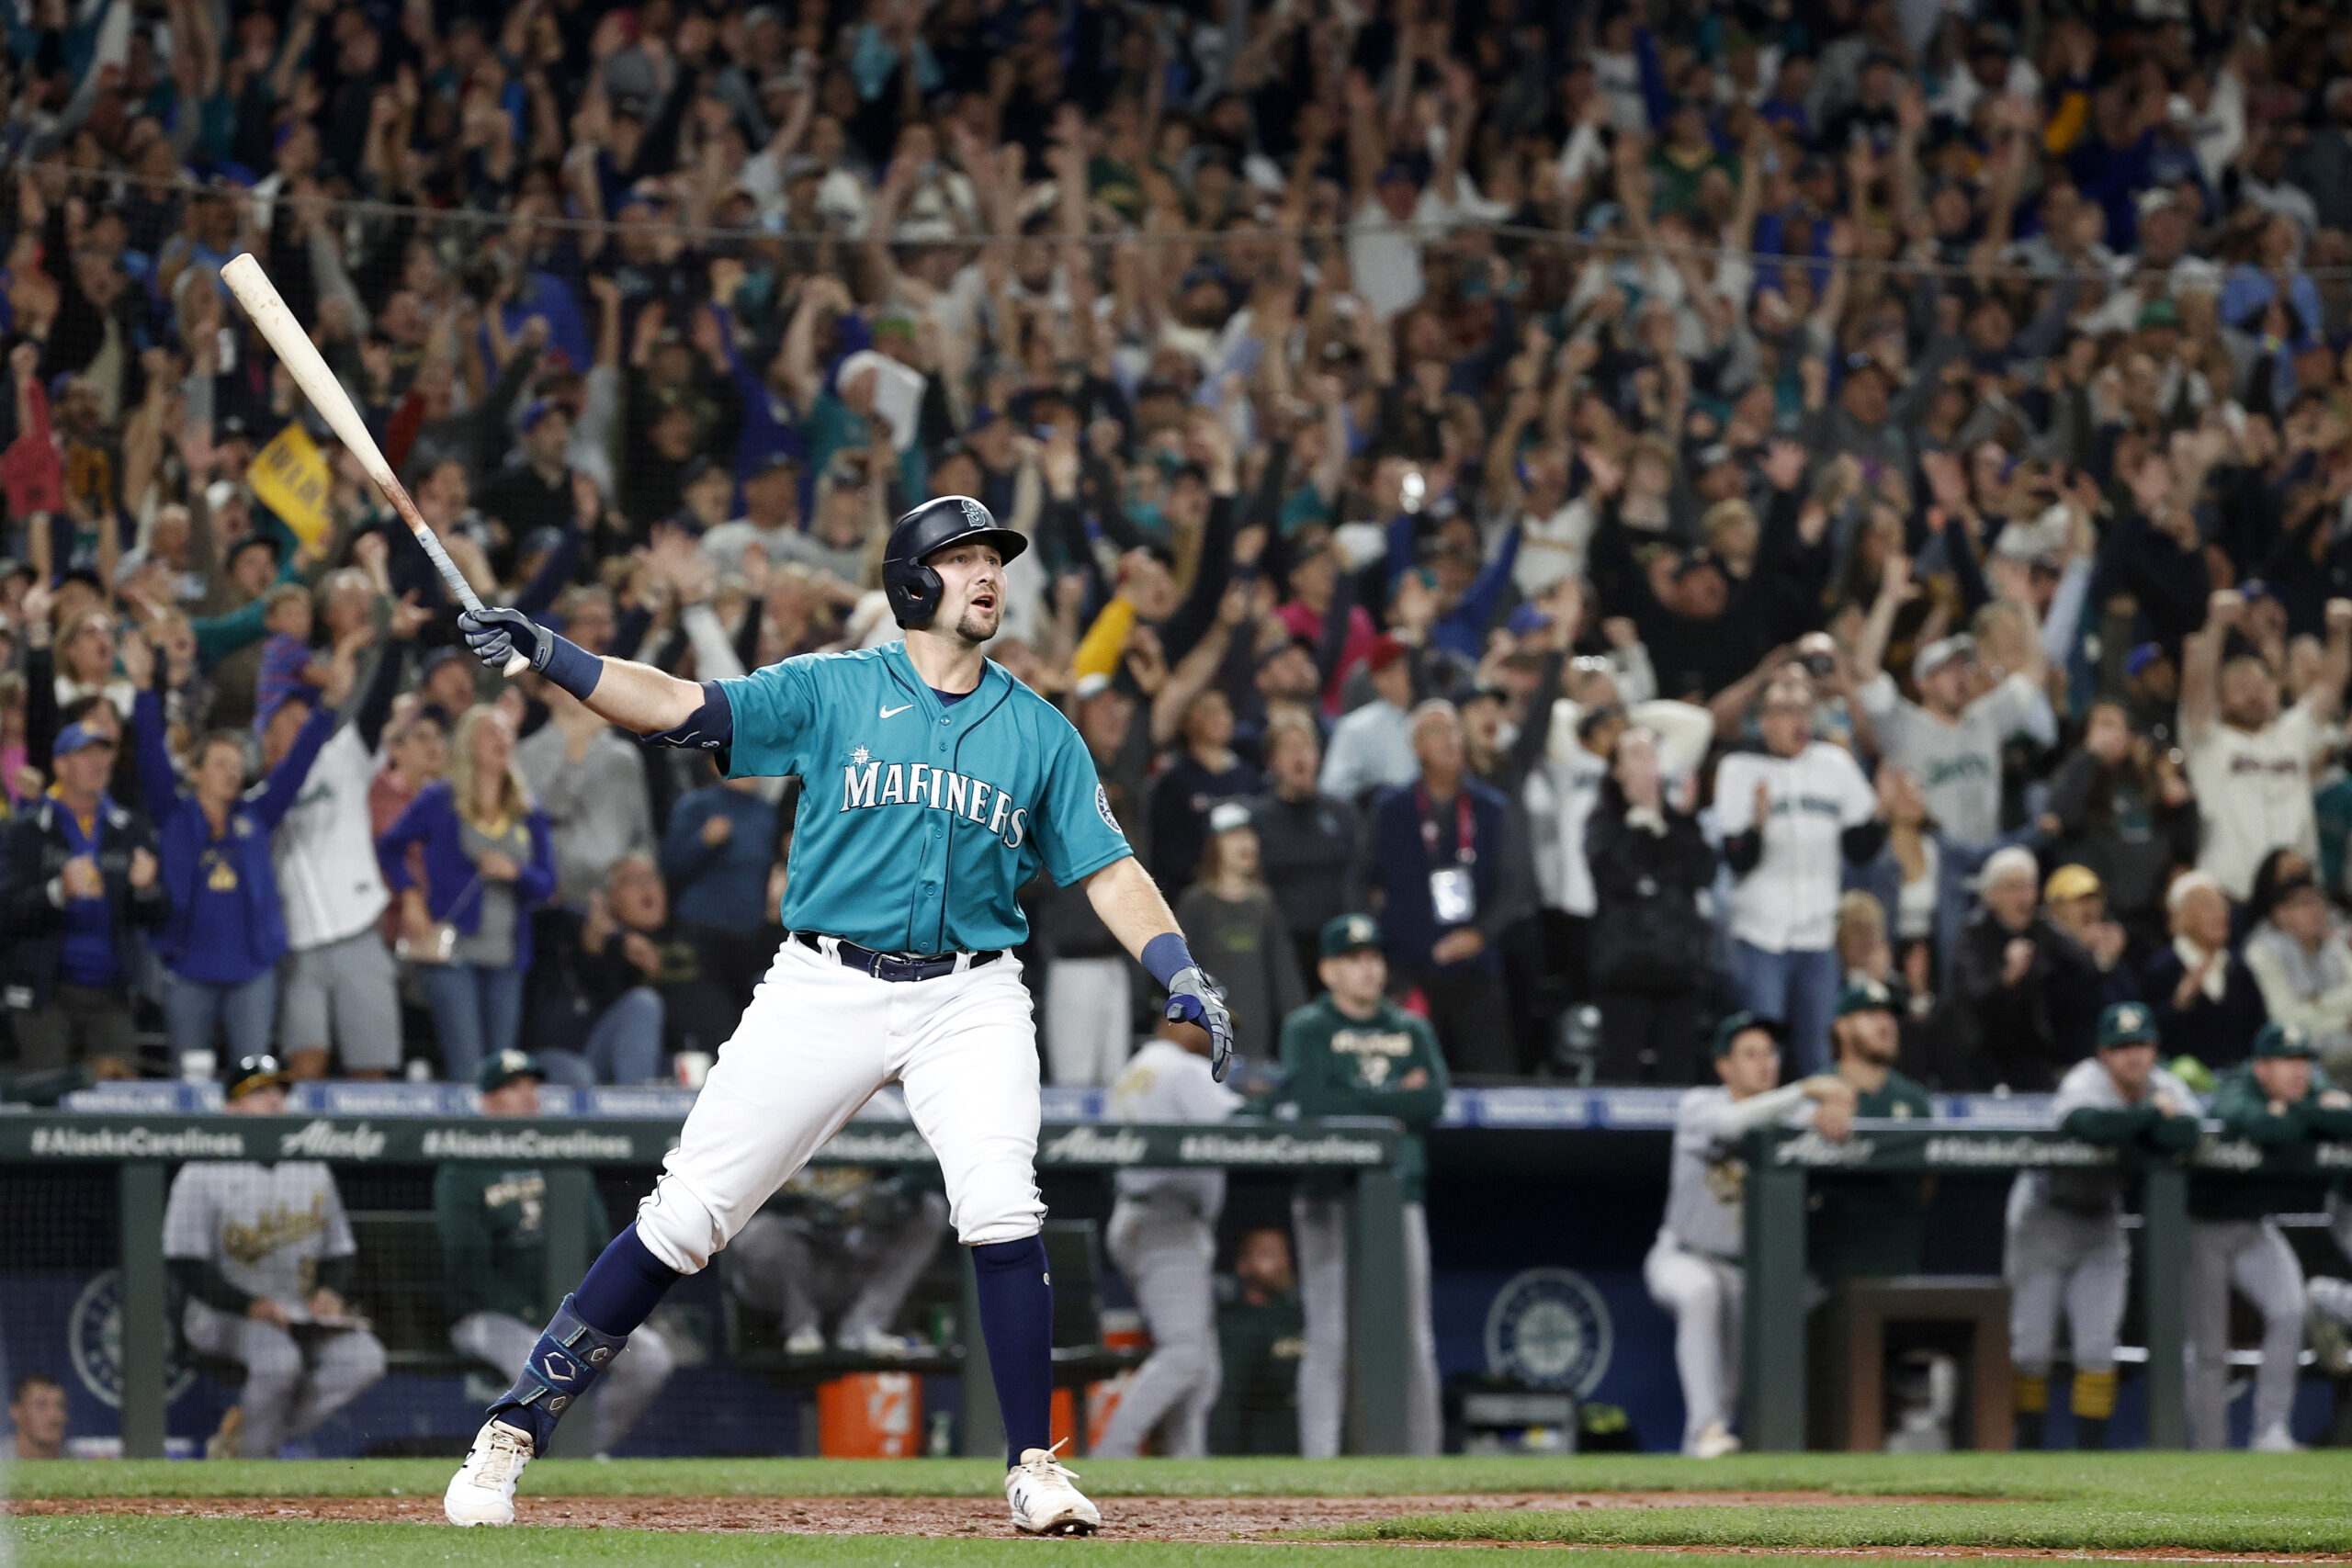 Cal Raleigh’s epic walk-off home run that sent the Seattle Mariners to the playoffs, in photos